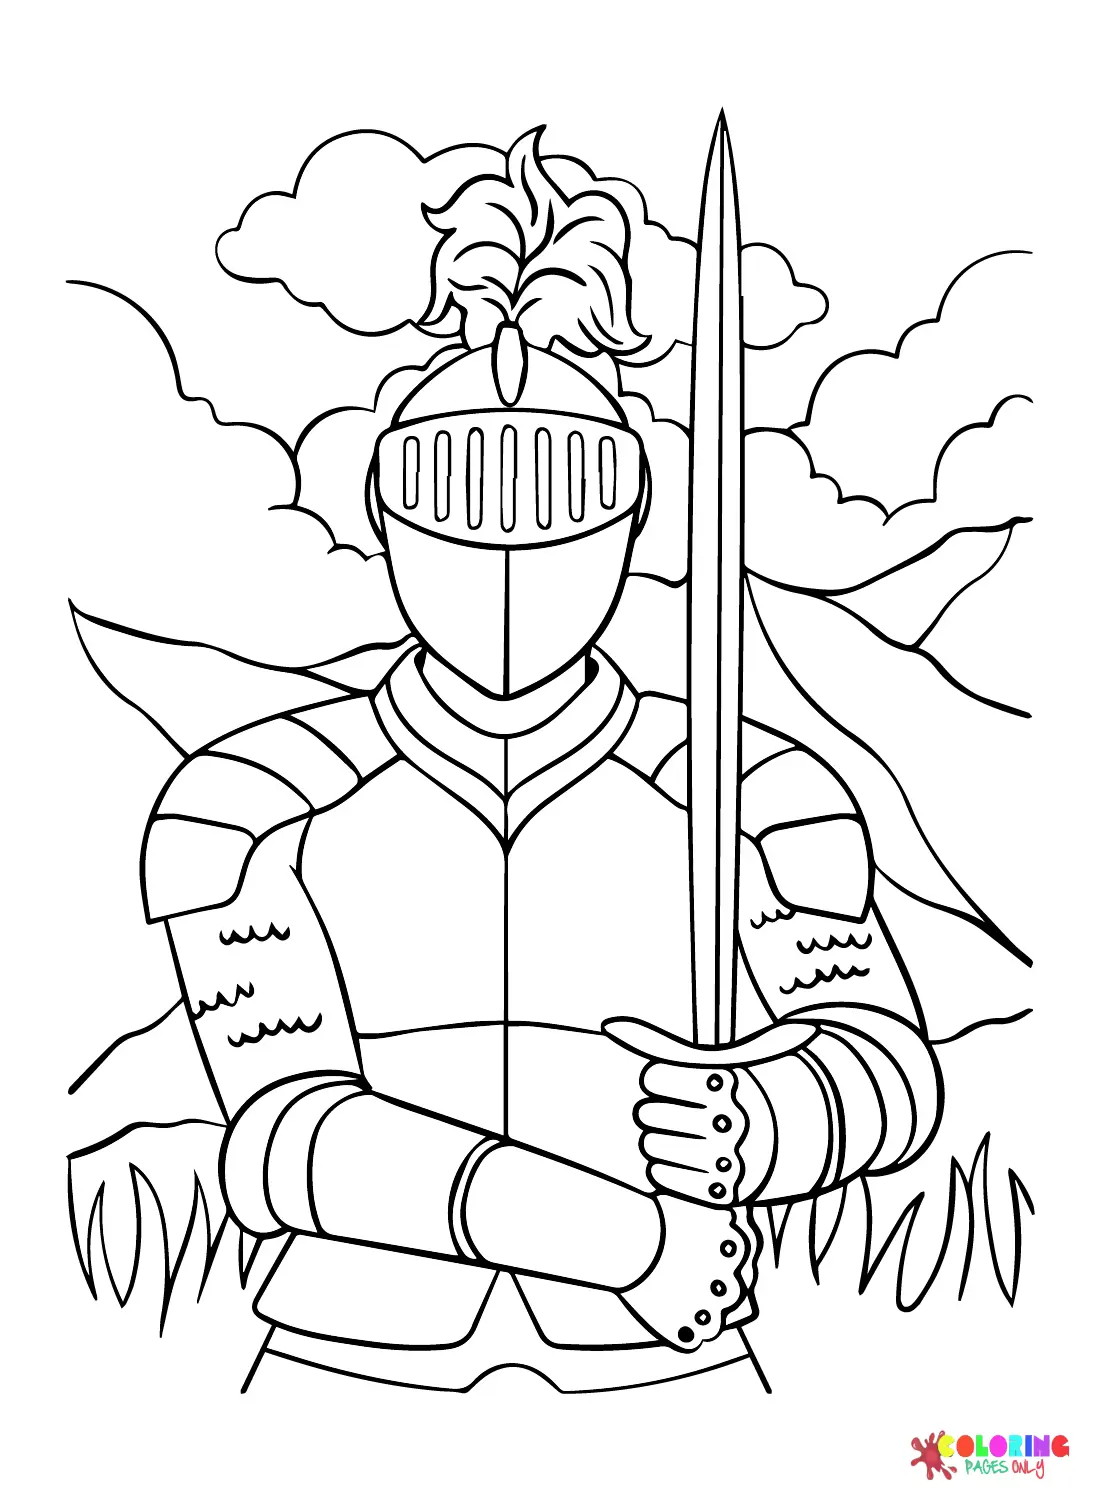 Ancient Rome and Roman Empire Coloring Pages